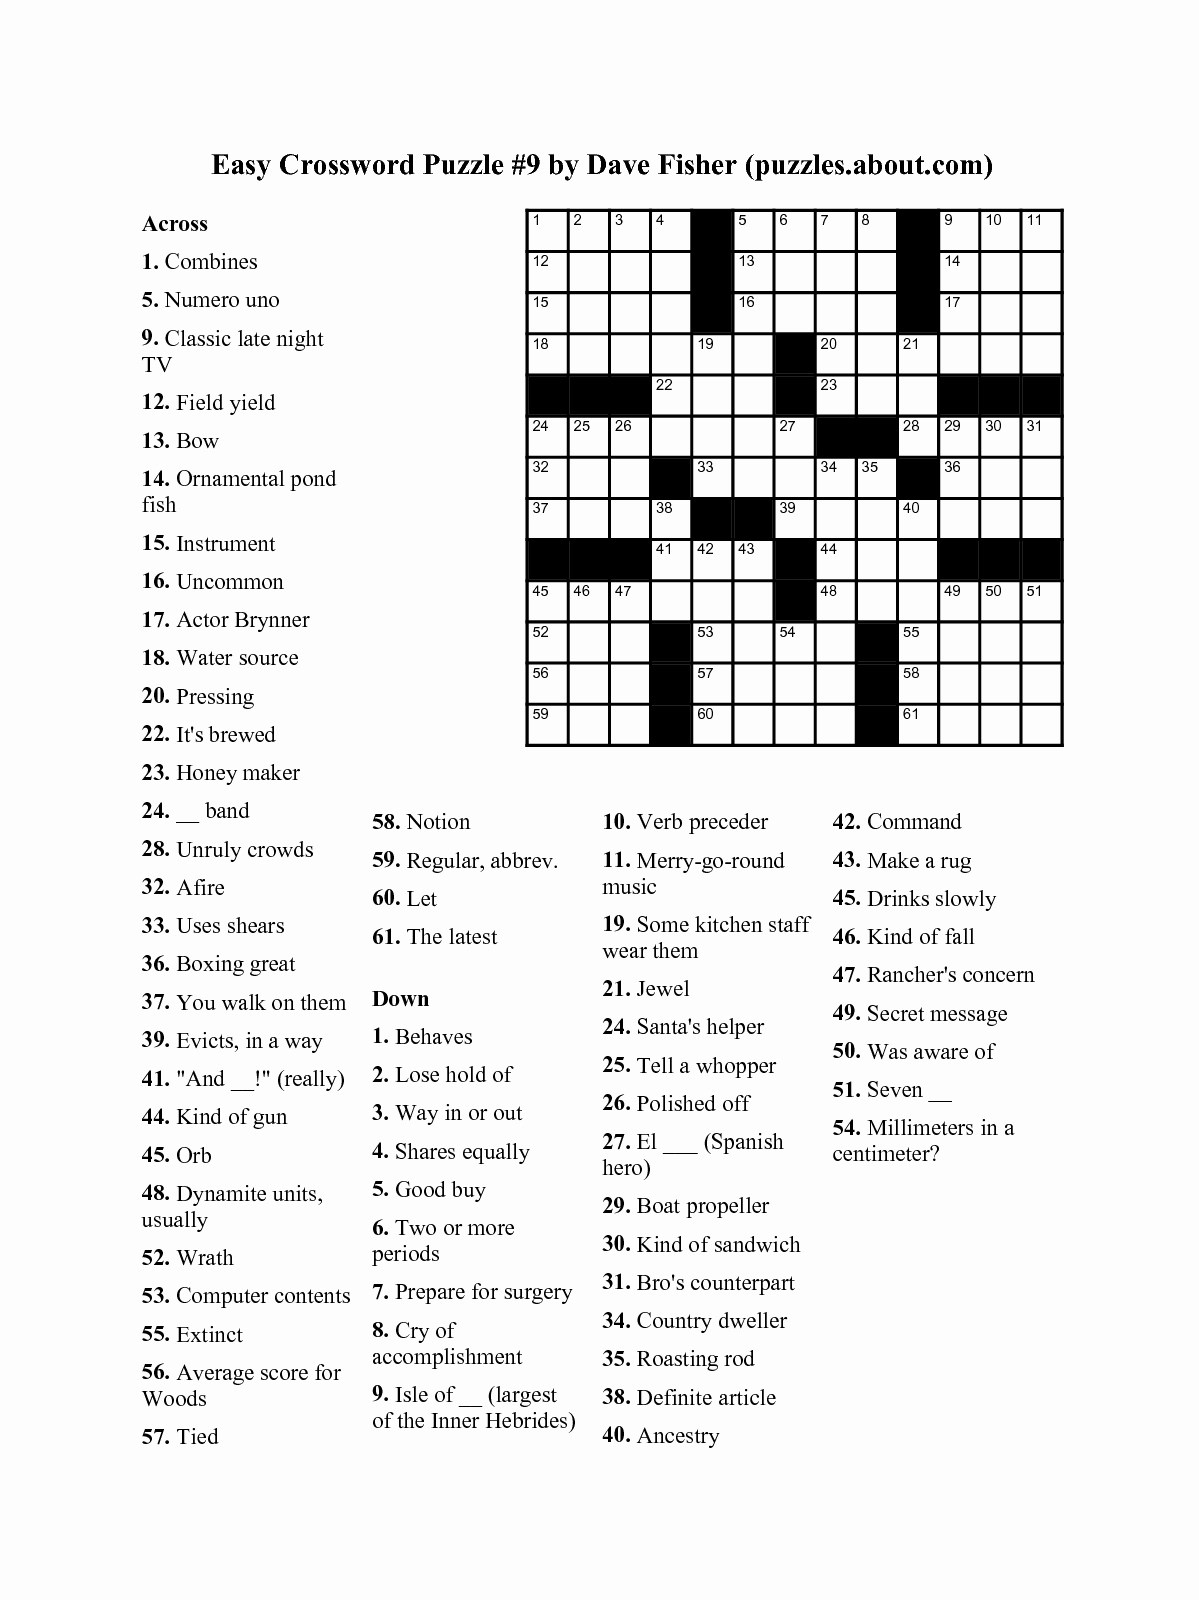 Online Crossword Puzzle Maker Free Printable Archives - Hashtag Bg - Crossword Puzzle Maker Printable And Free